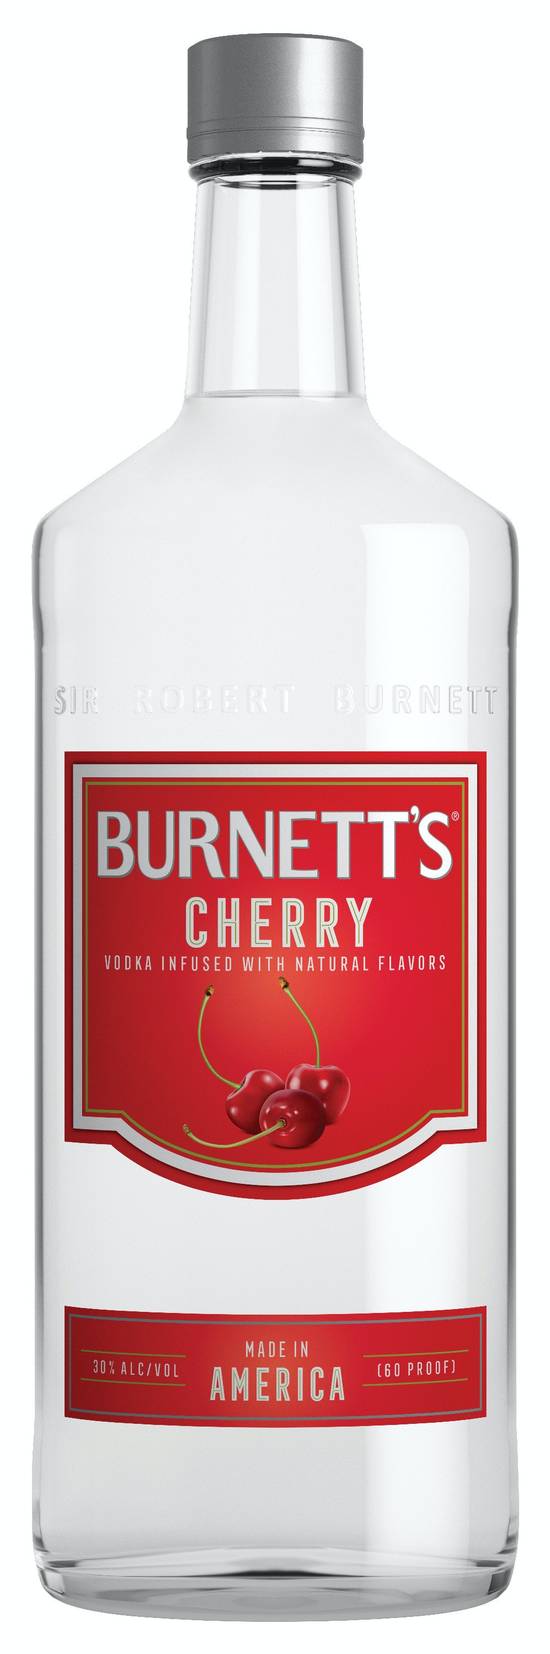 Burnett's Vodka Infused With Cherry Natural Flavor (750 ml)